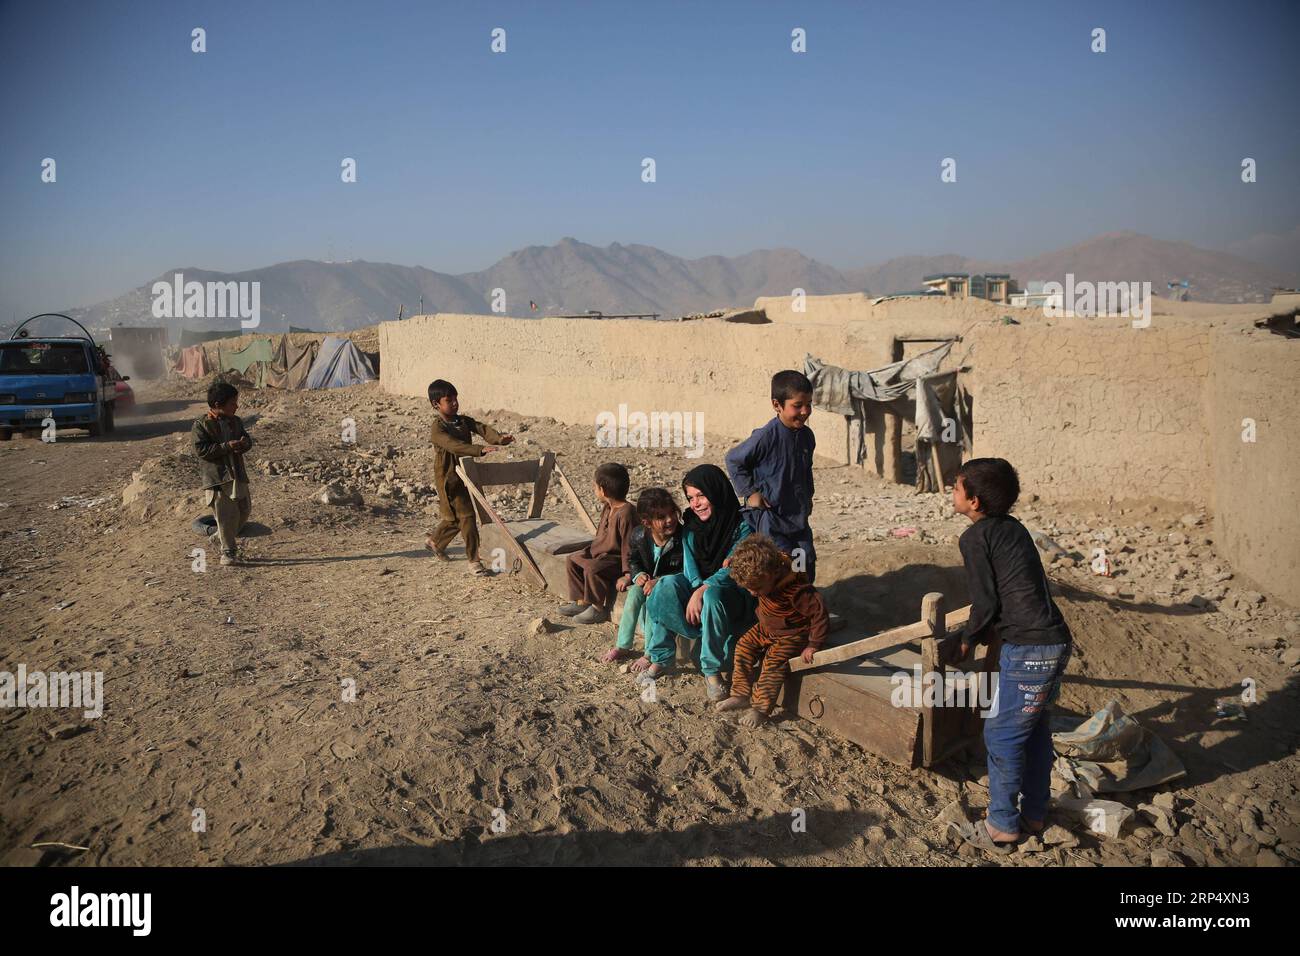 (181120) -- KABUL, Nov. 20, 2018 -- Afghan children play outside their mud houses on World Children s Day in Kabul, capital of Afghanistan, Nov. 20, 2018. The United Nations Children s Fund (UNICEF) office in Afghanistan said on Monday that about 3.7 million Afghan children have no access to school due to insecurity and poverty in the country. ) AFGHANISTAN-KABUL-WORLD CHILDREN DAY RahmatxAlizadah PUBLICATIONxNOTxINxCHN Stock Photo